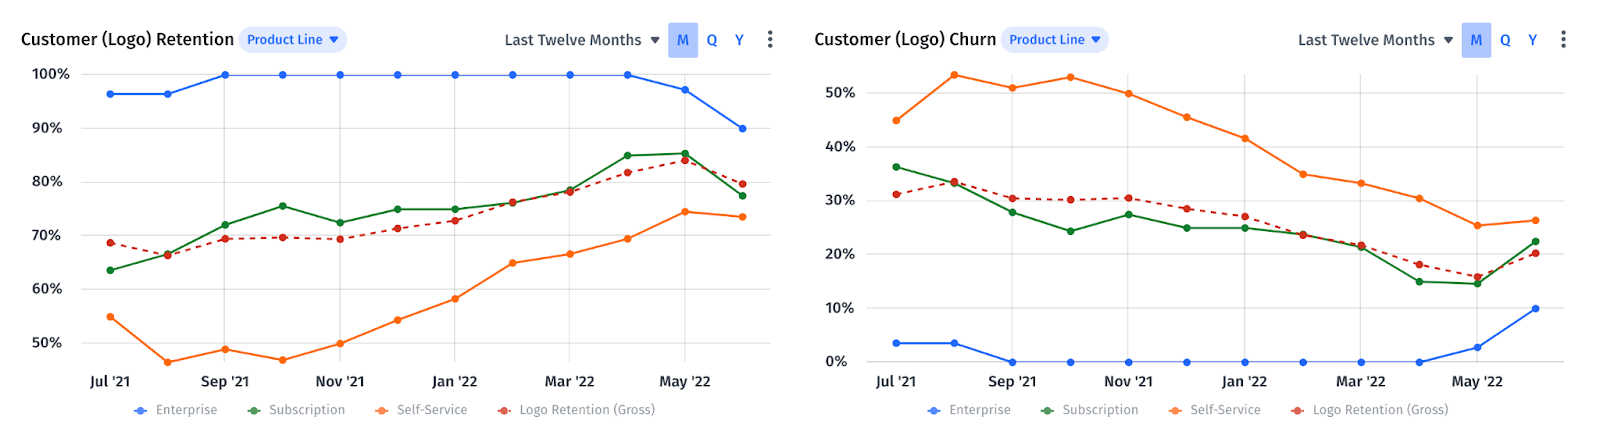 Customer retention and churn line graphs by logo in Mosaic